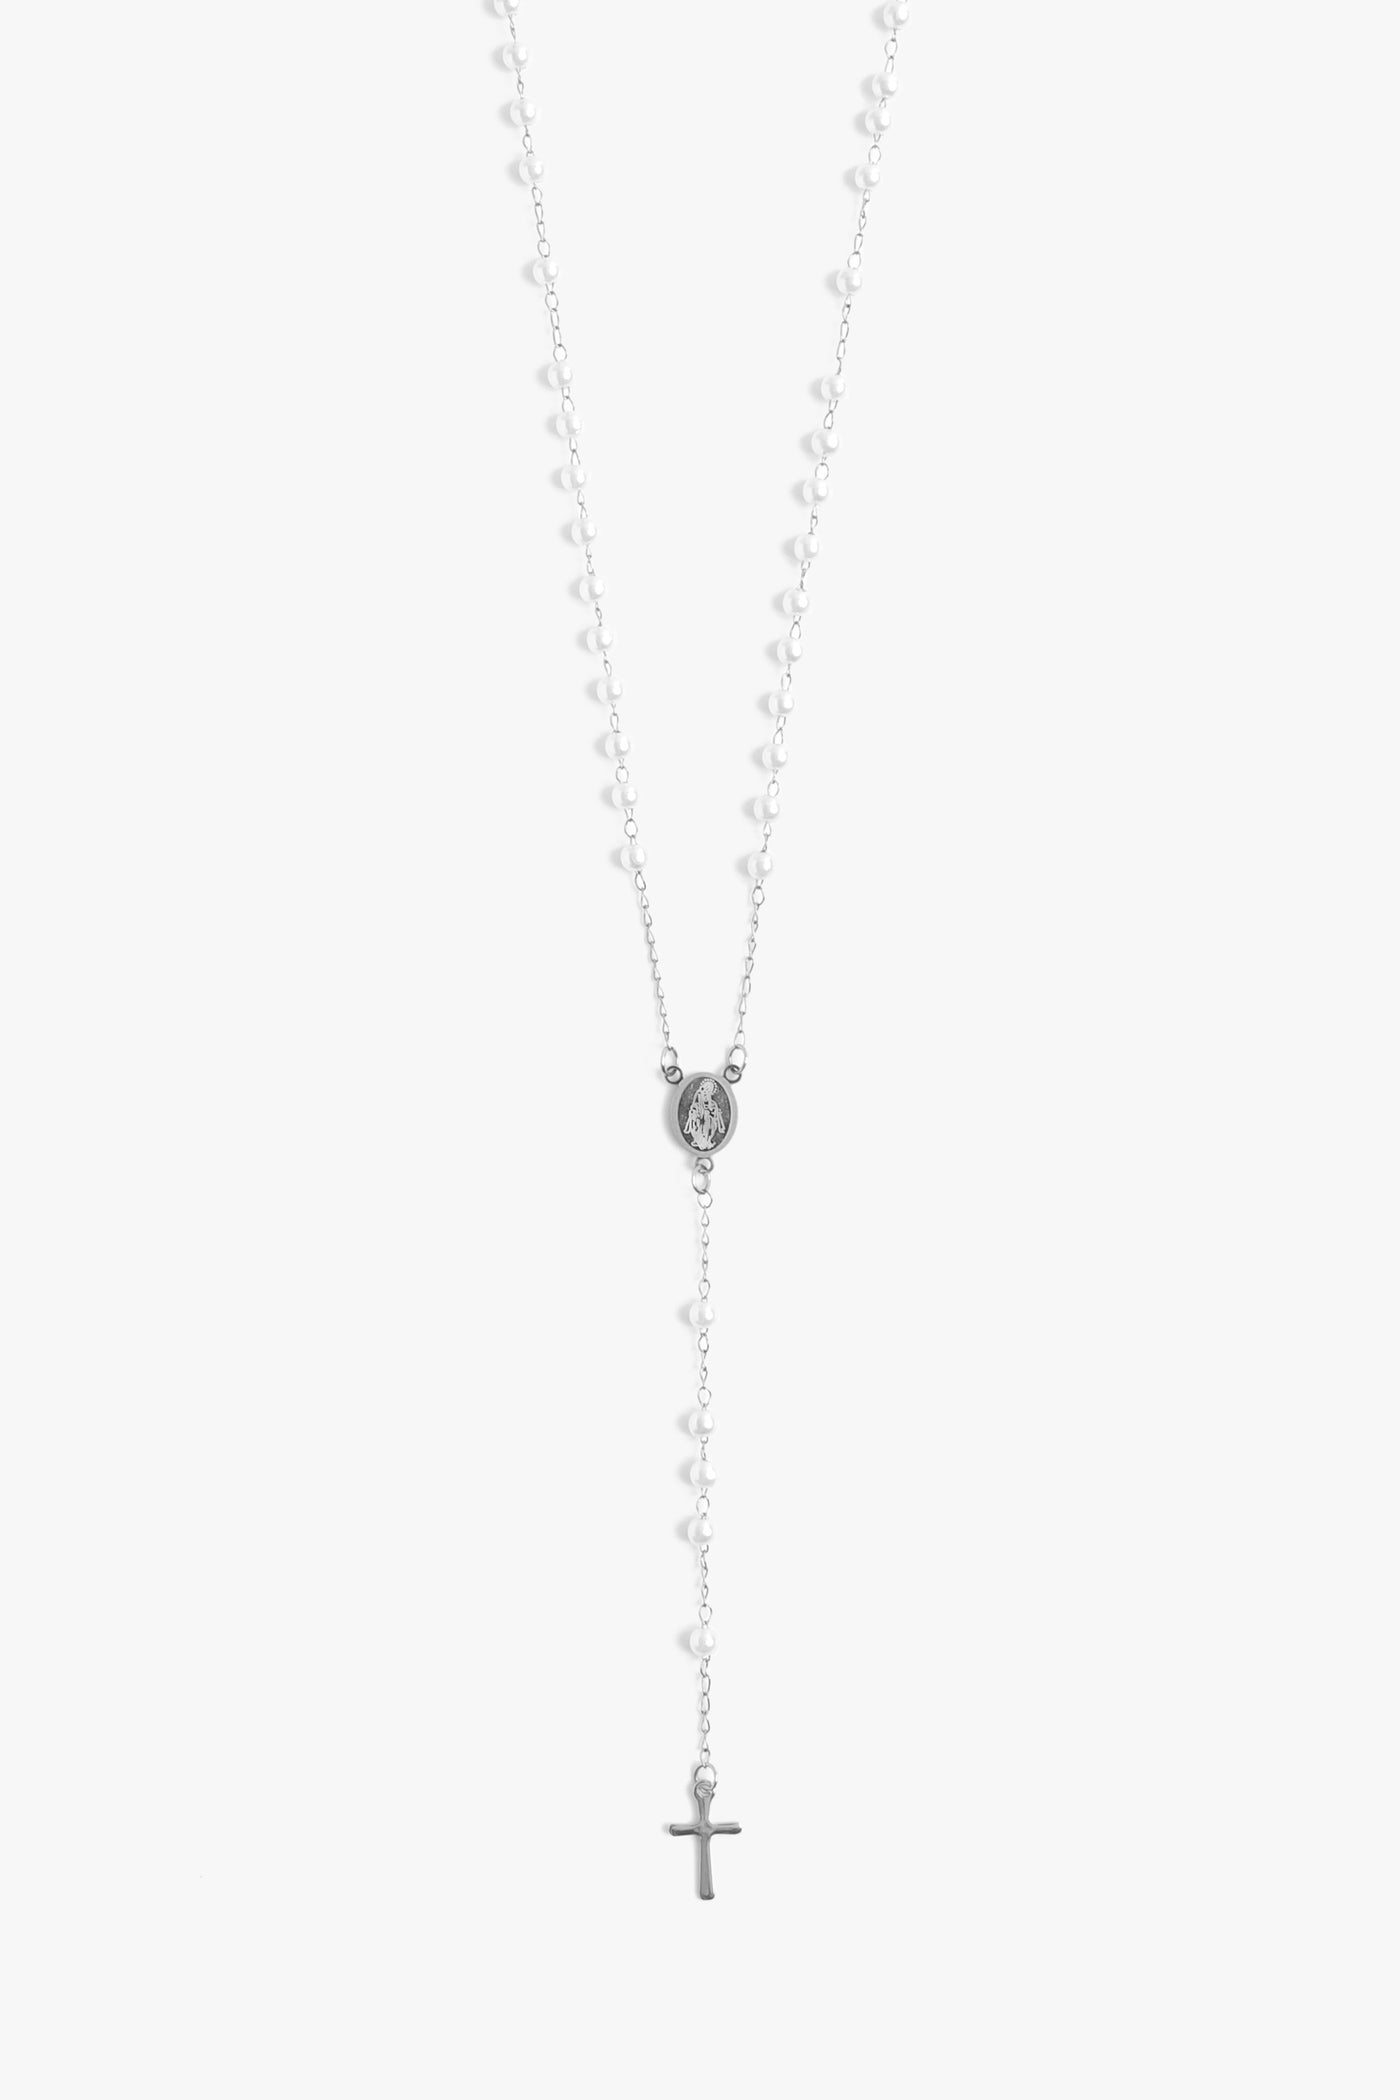 Marrin Costello Jewelry Estelle Rosary with pearls as functional prayer beads with lobster clasp closure and lariat drop. Waterproof, sustainable, hypoallergenic. Polished stainless steel.